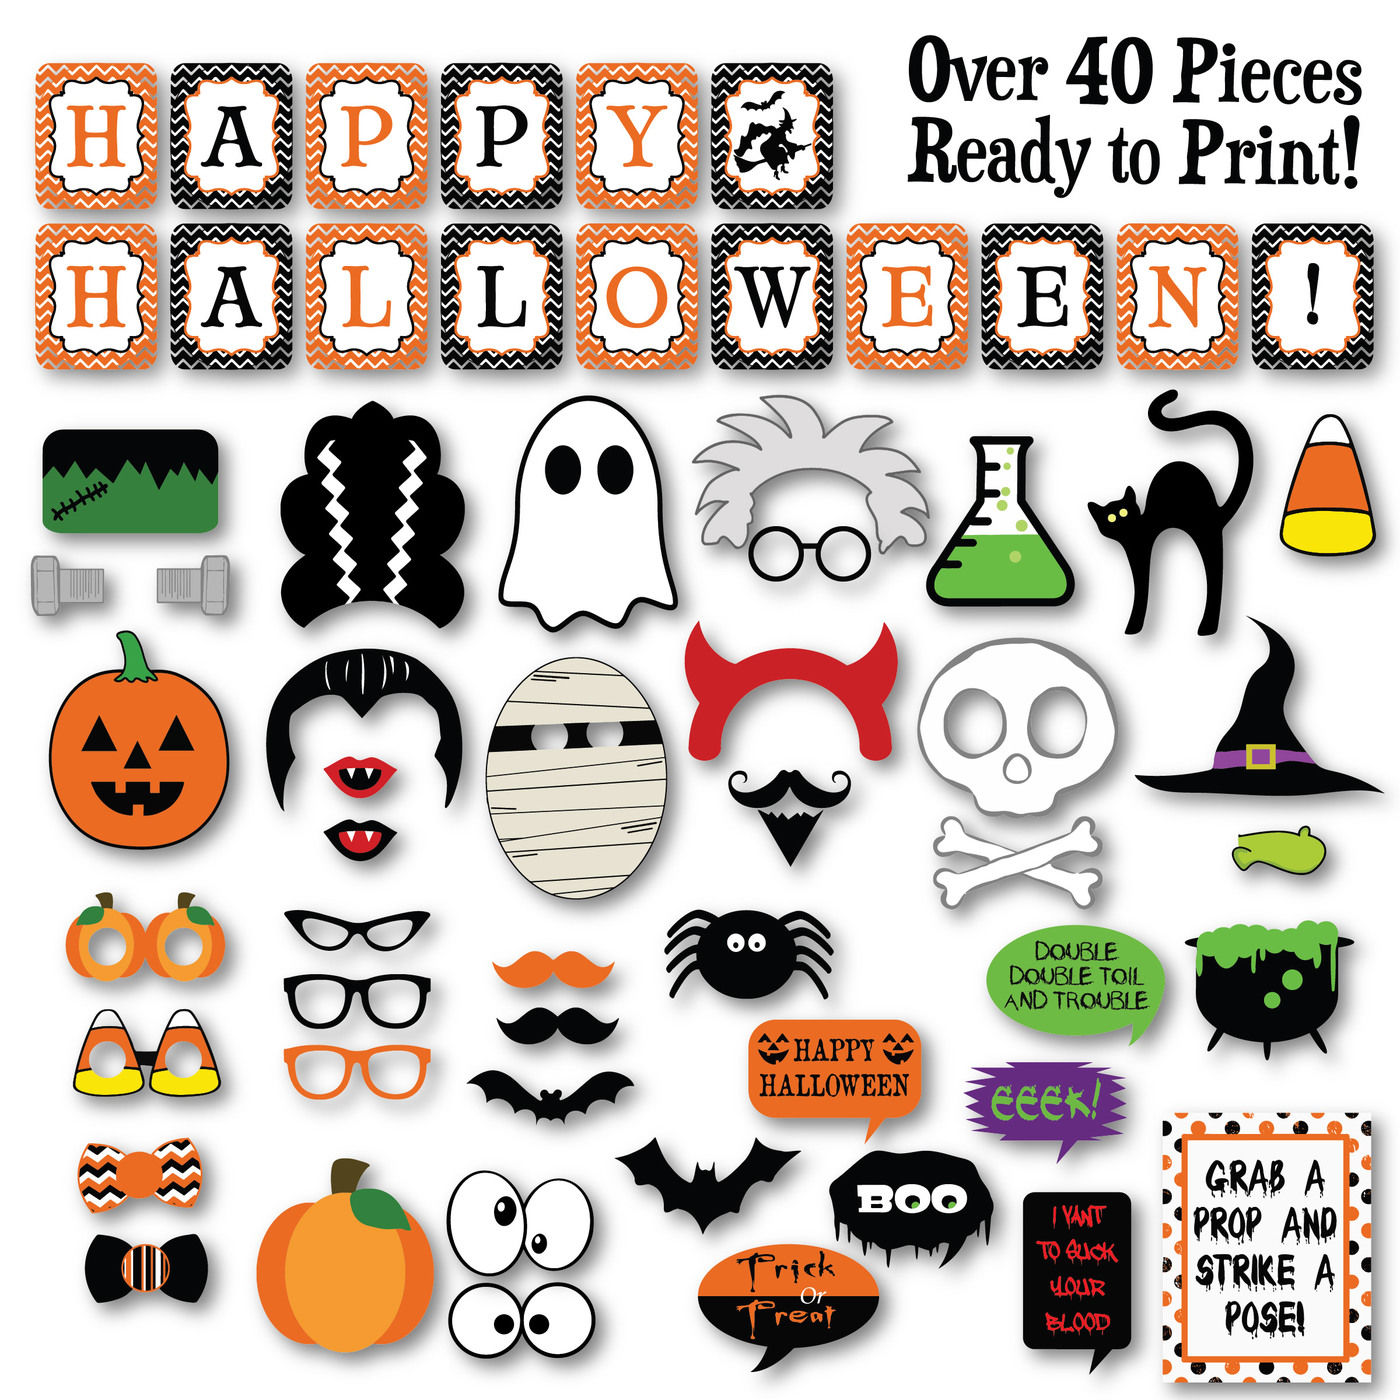 Halloween Photo Booth Props Svg Cut File By Shannon Keyser Thehungryjpeg Com